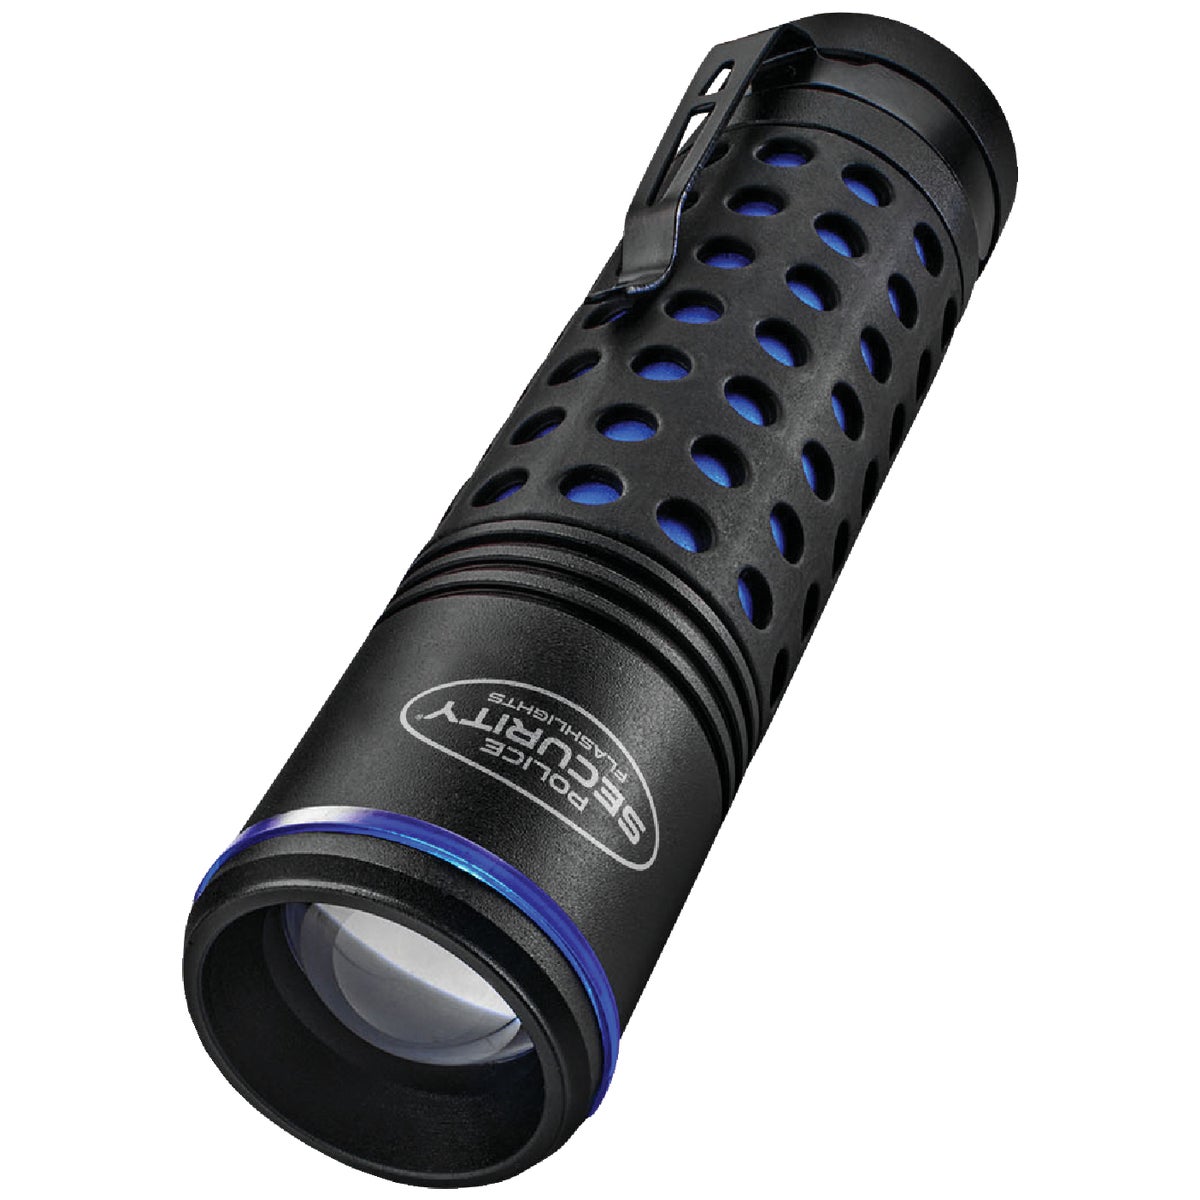 Police Security Barricade 3AAA 400 Lm. Focusing Rubber Grip LED Flashlight